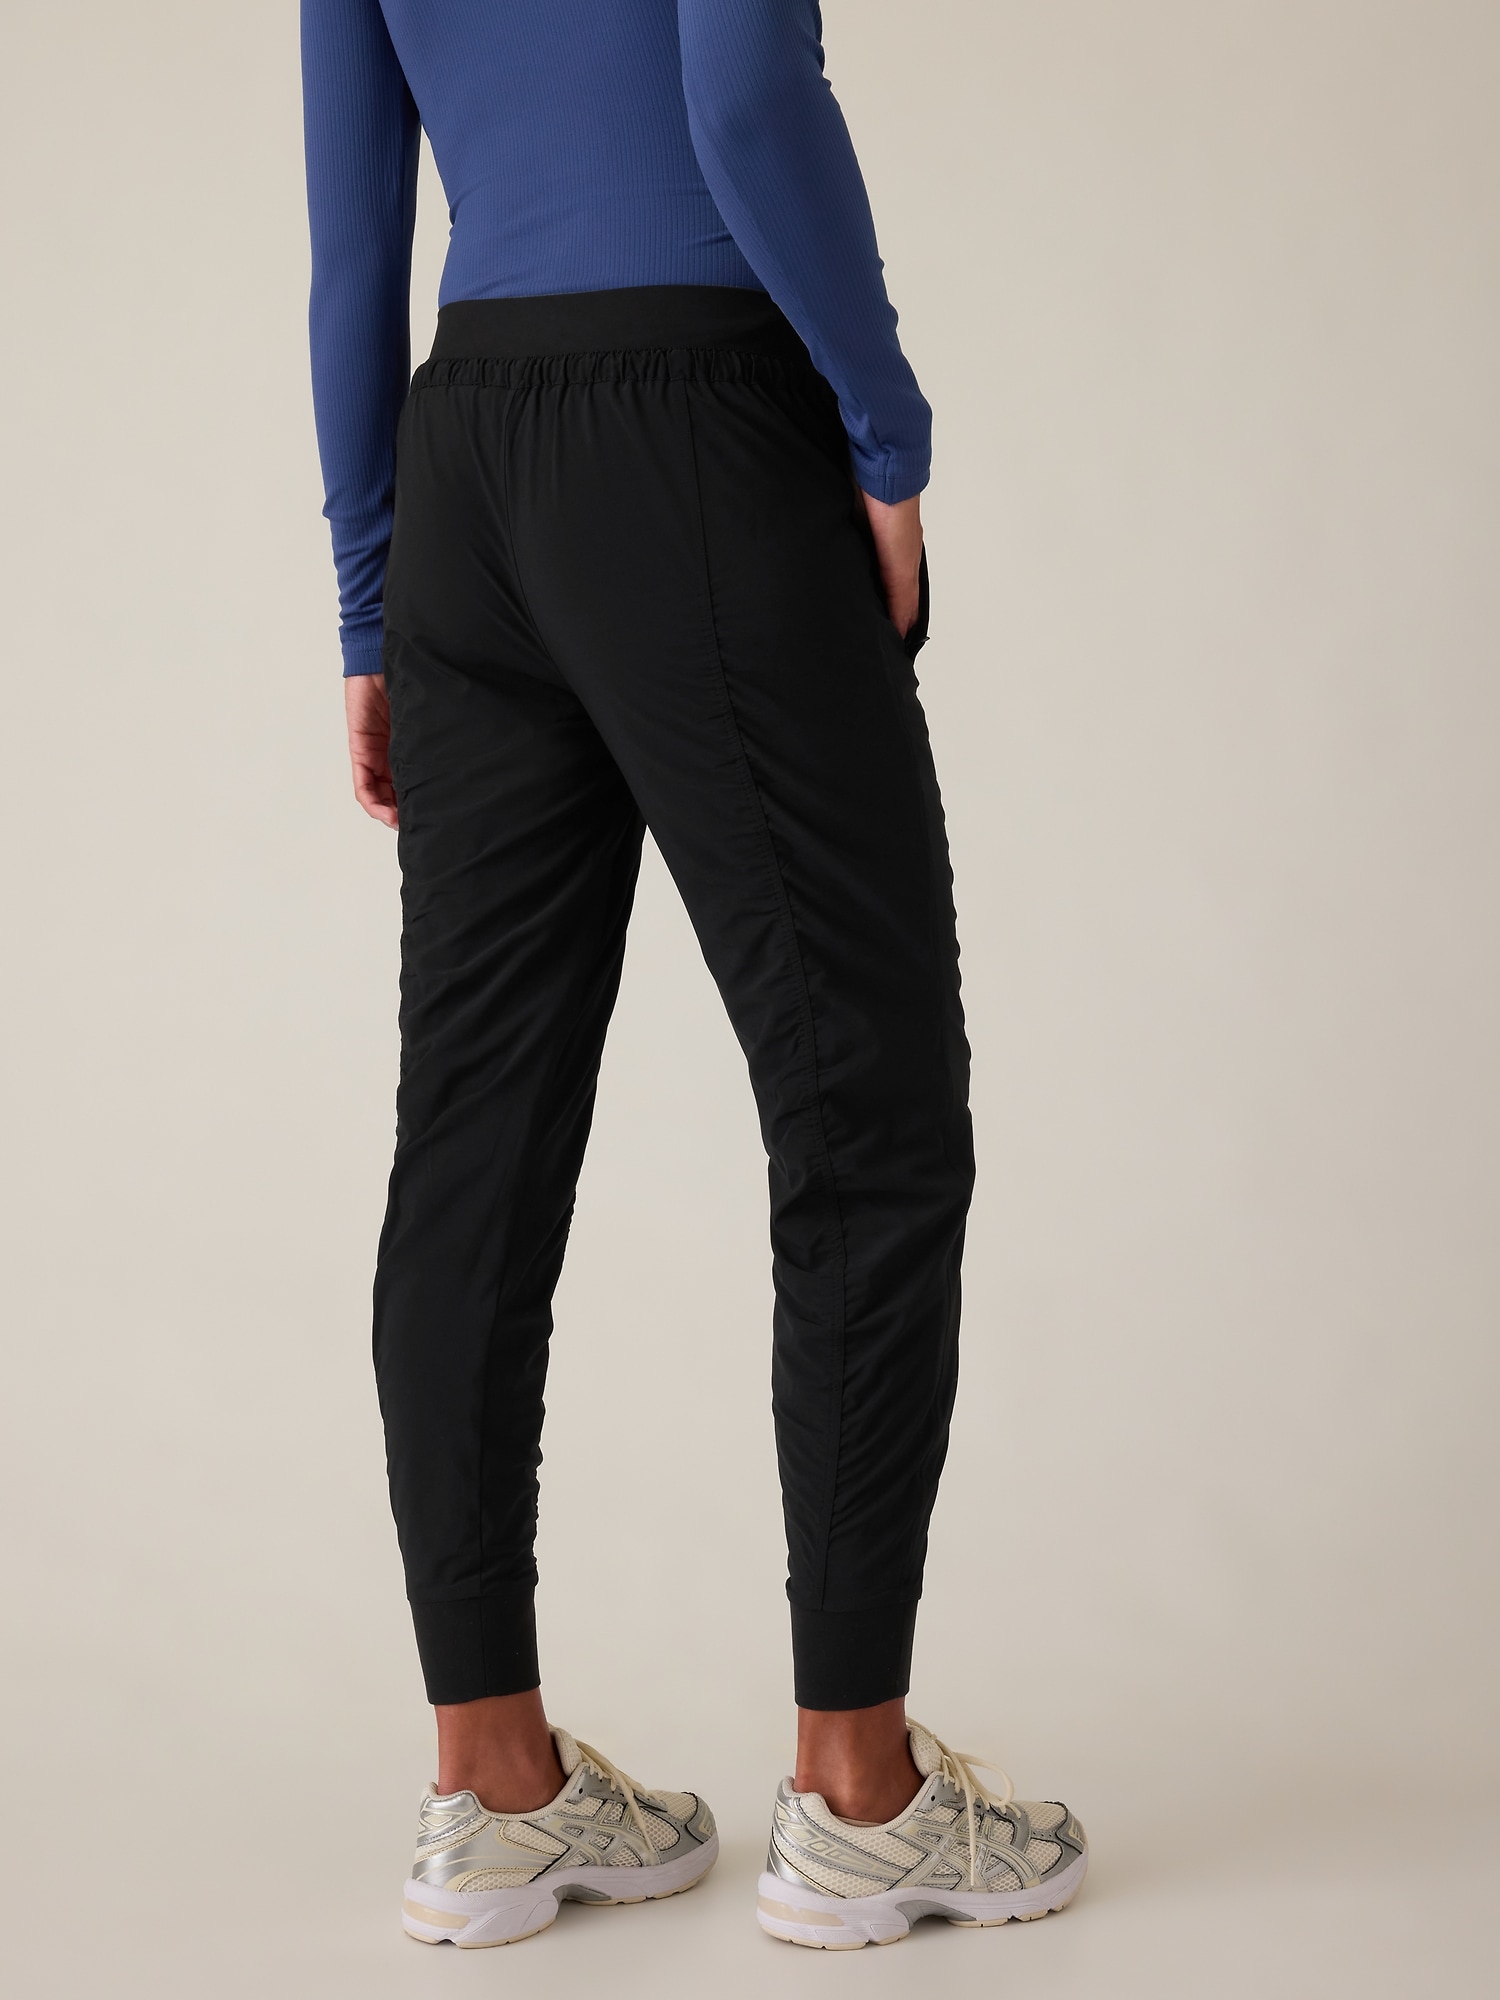 Buy Athleta Elation Joggers from the Gap online shop